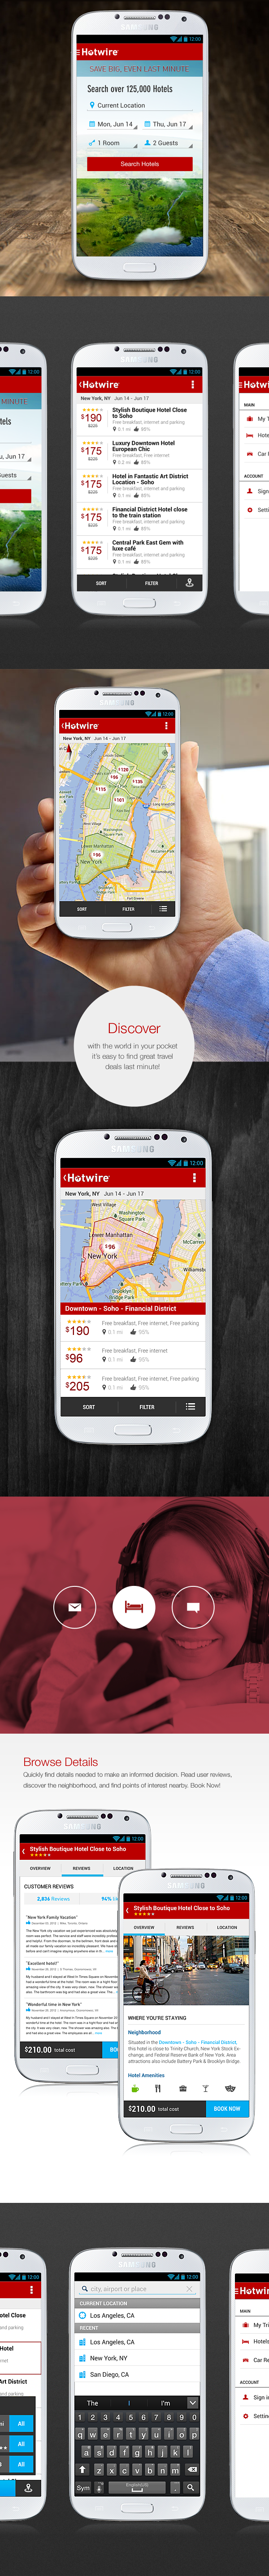 mobile android app ux UI interaction